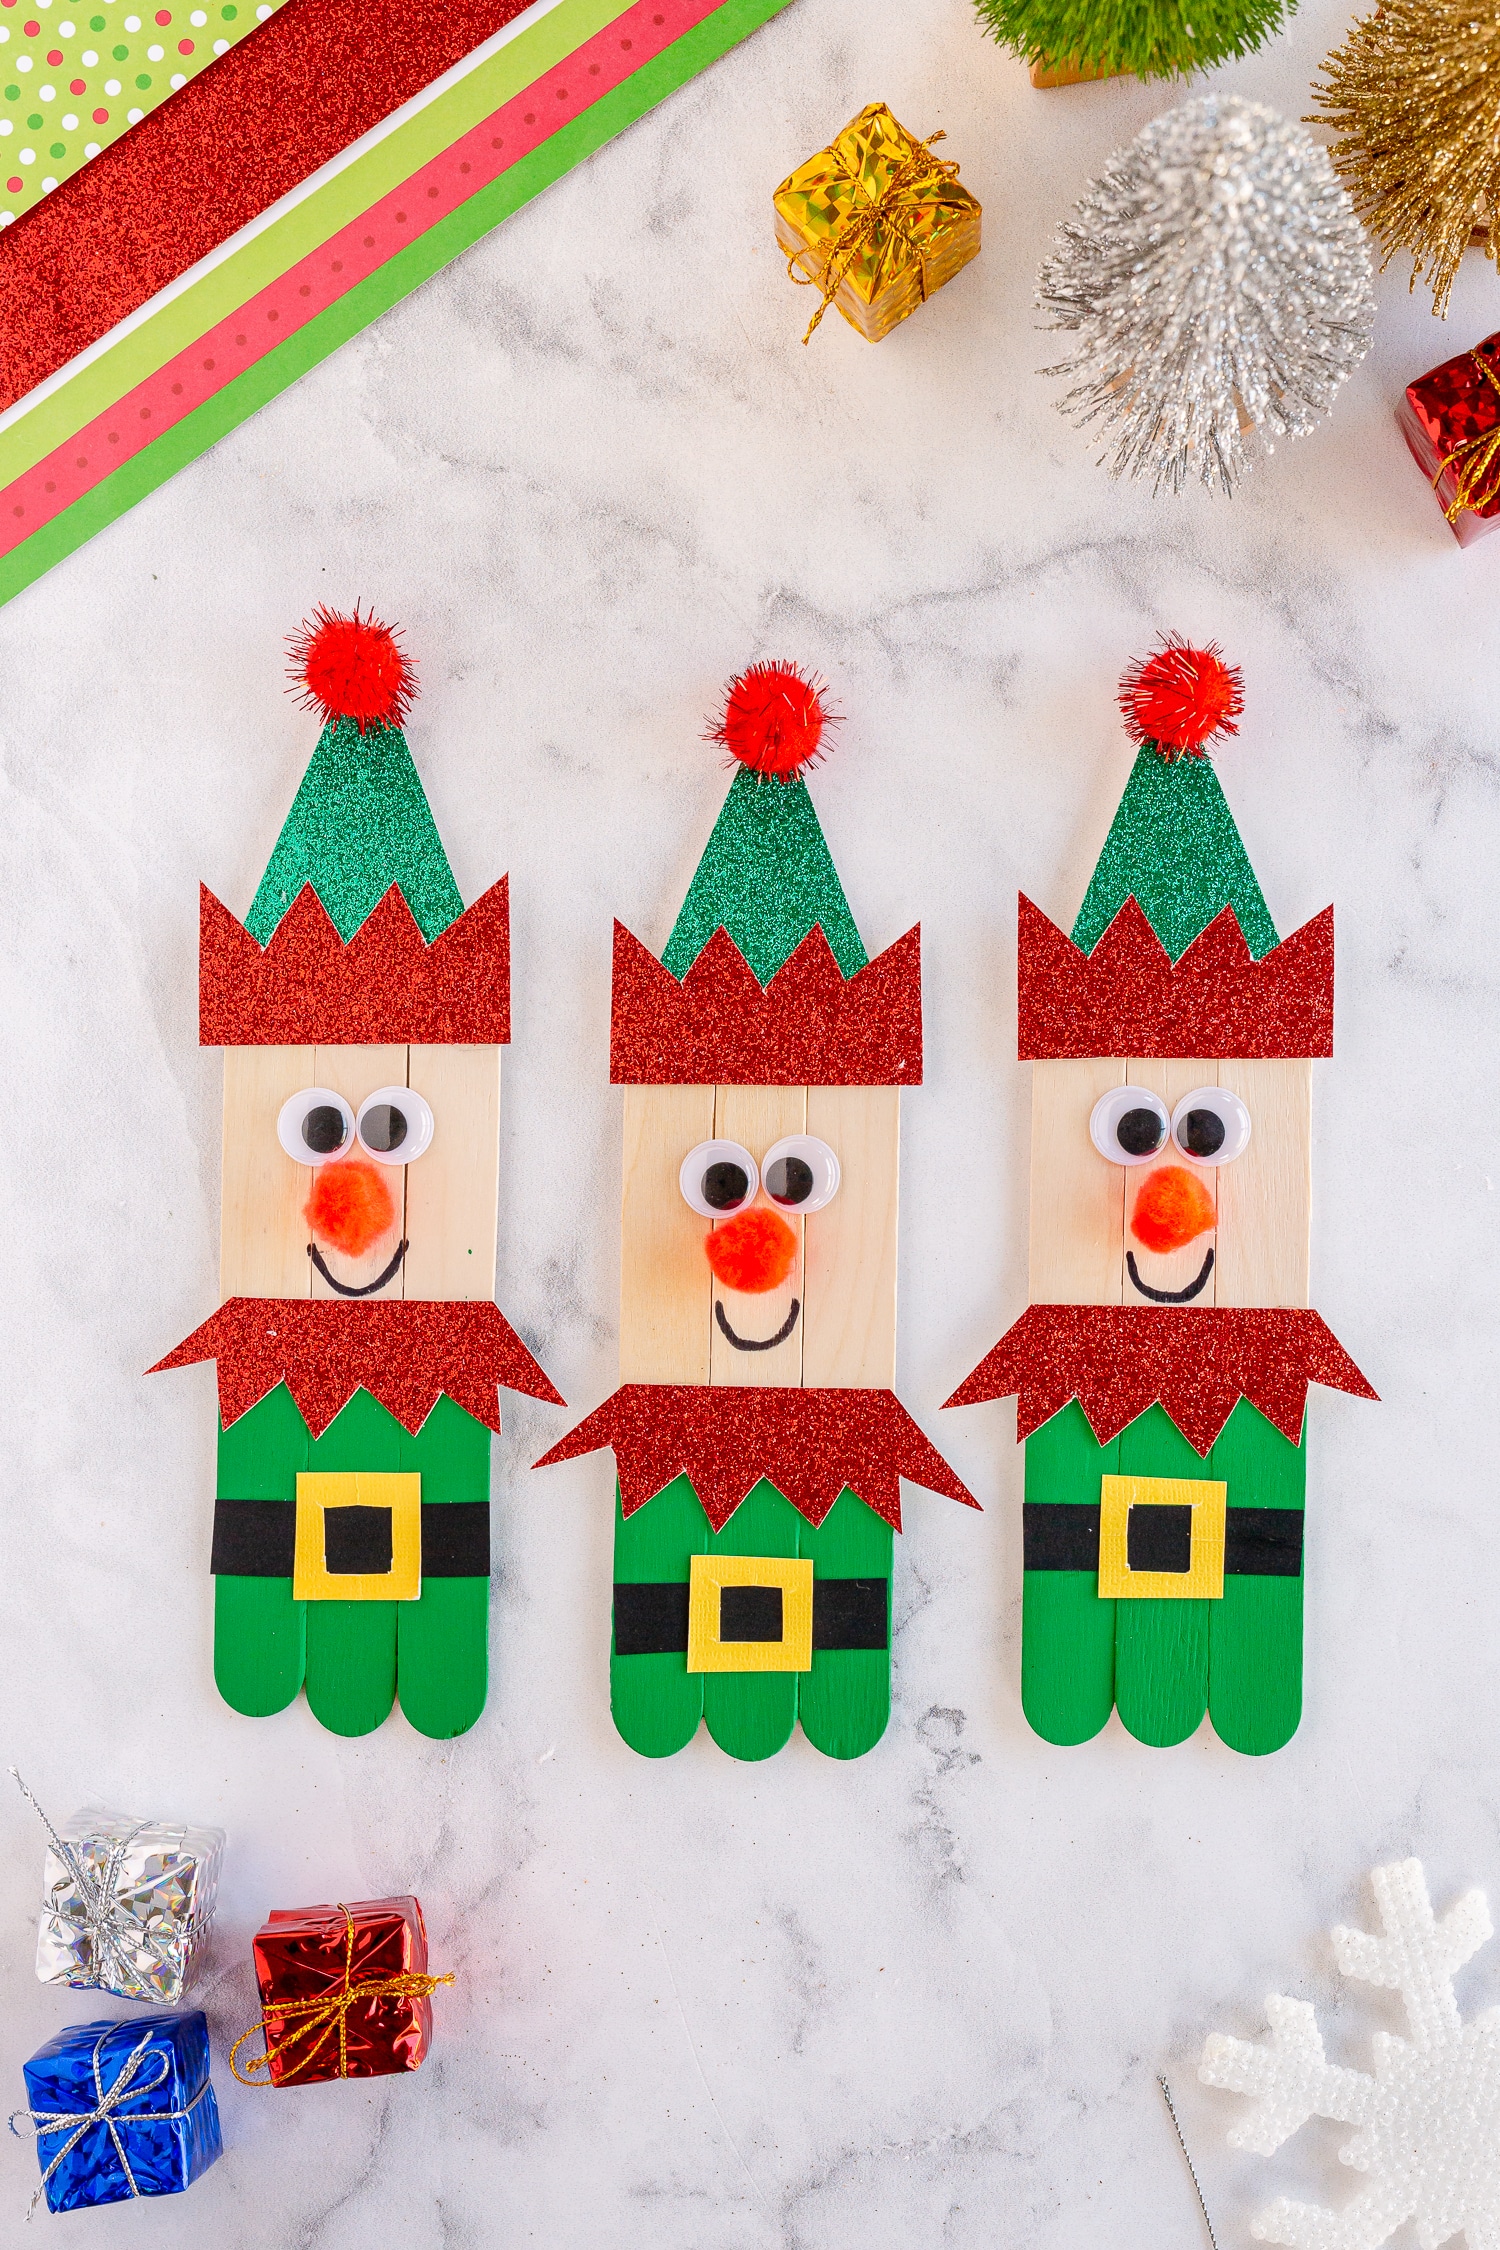 finished popsicle stick elves in a row